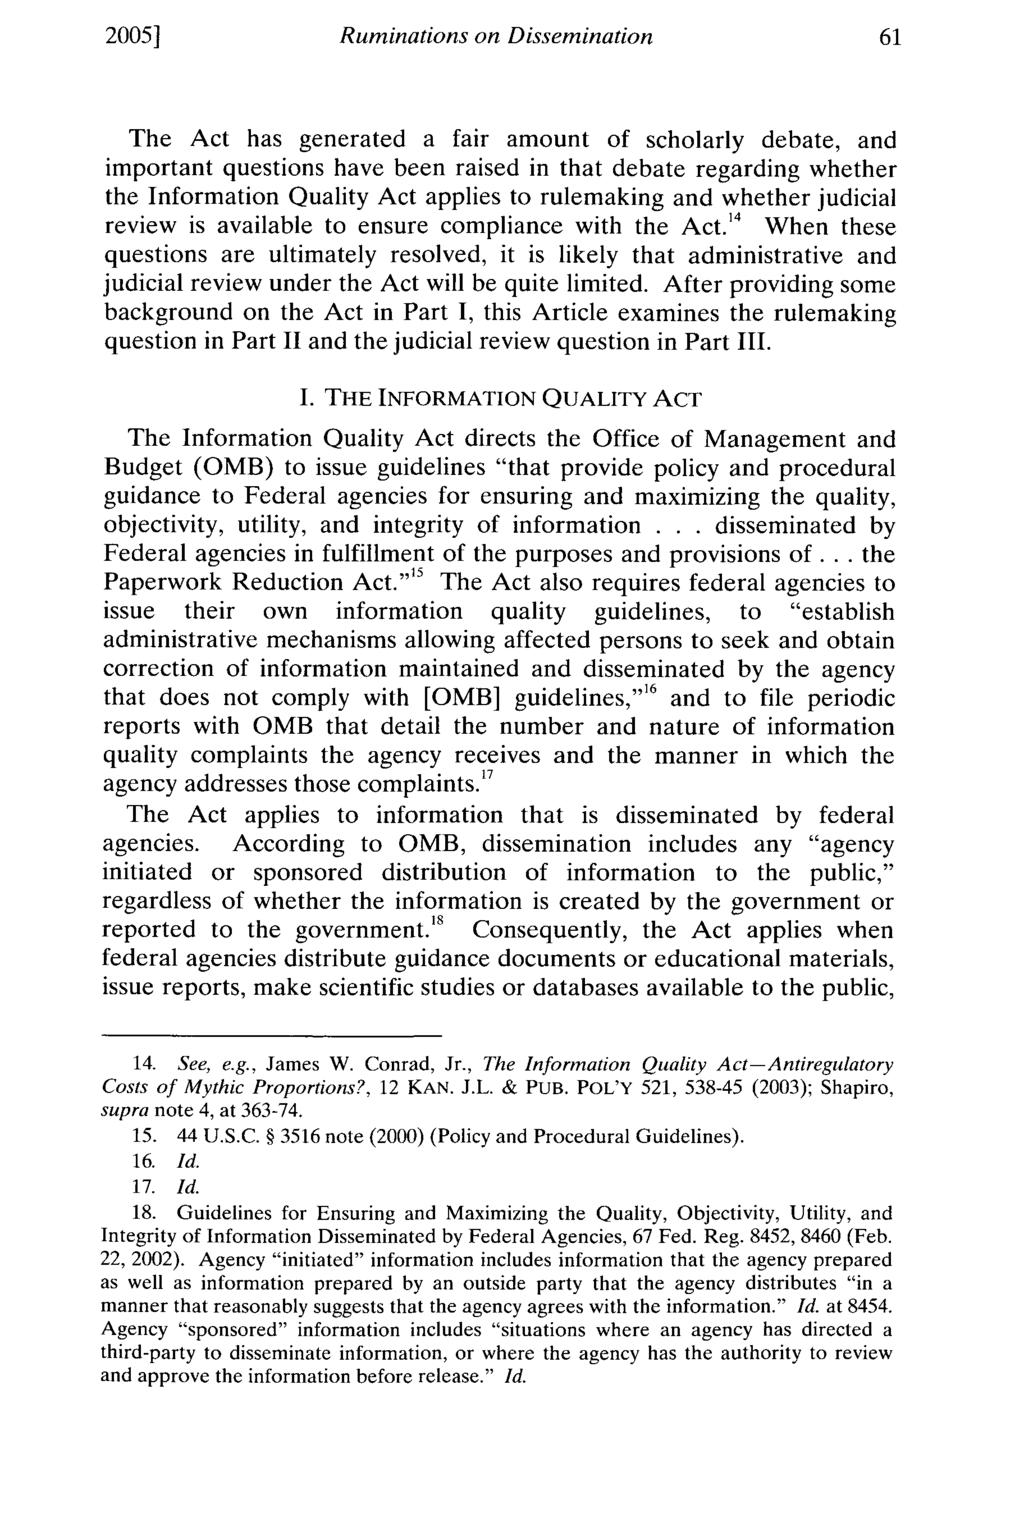 2005] Ruminations on Dissemination The Act has generated a fair amount of scholarly debate, and important questions have been raised in that debate regarding whether the Information Quality Act